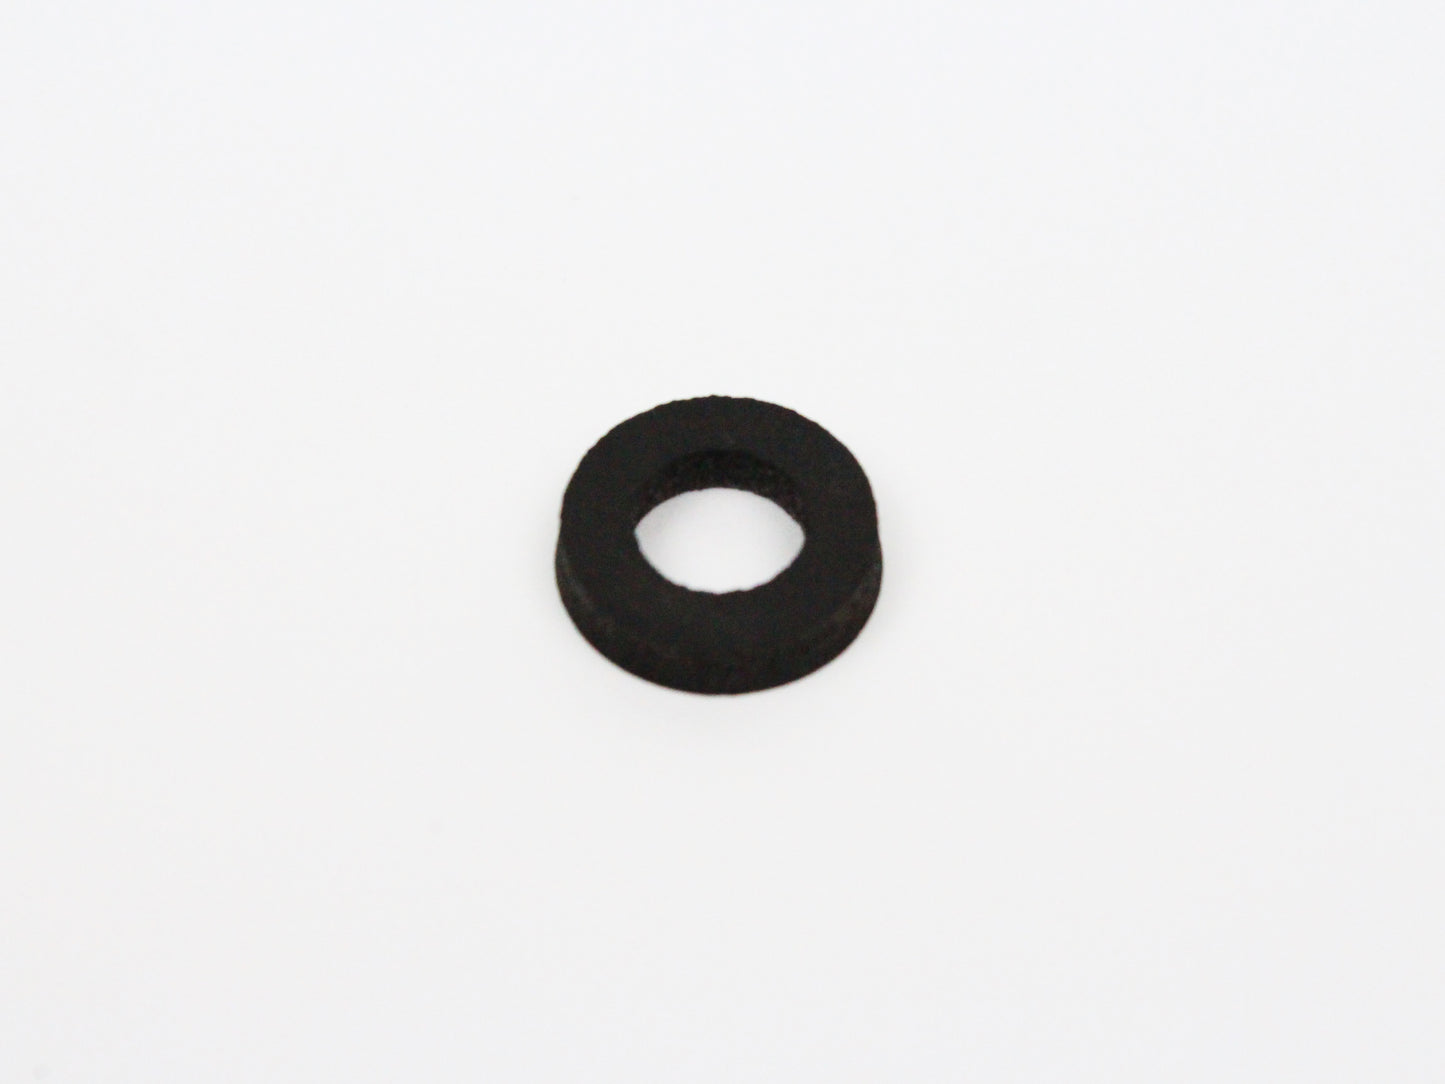 Rubber washer for Scandvik 15/1 metric fittings and 3/8" bsp